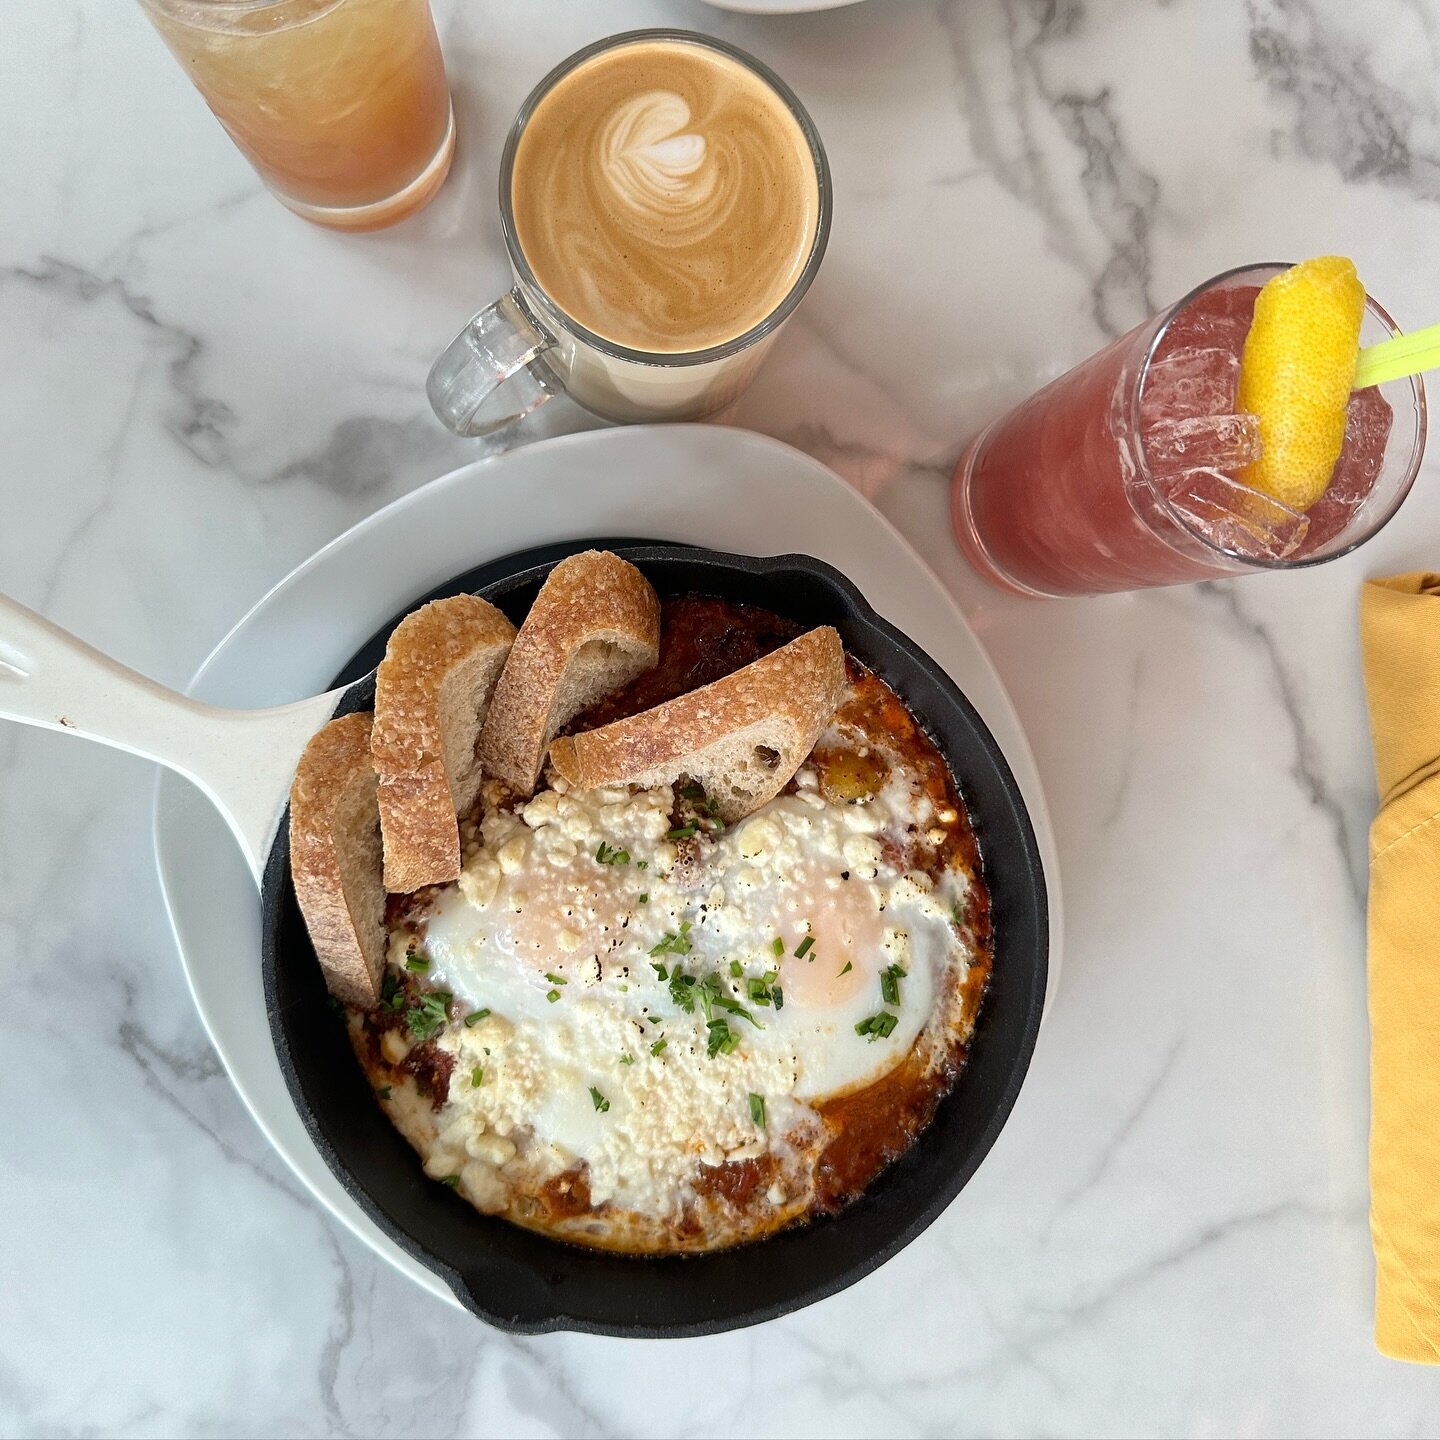 So delicious and warming, our shakshouka will chase the winter chill away. Shakshouka is a dish of eggs poached in a rich sauce of onions, peppers, tomatoes and spices! 
Serving brunch till 3 pm! 

#boozybrunch #downtownmissoula #shakshouka #latte #c